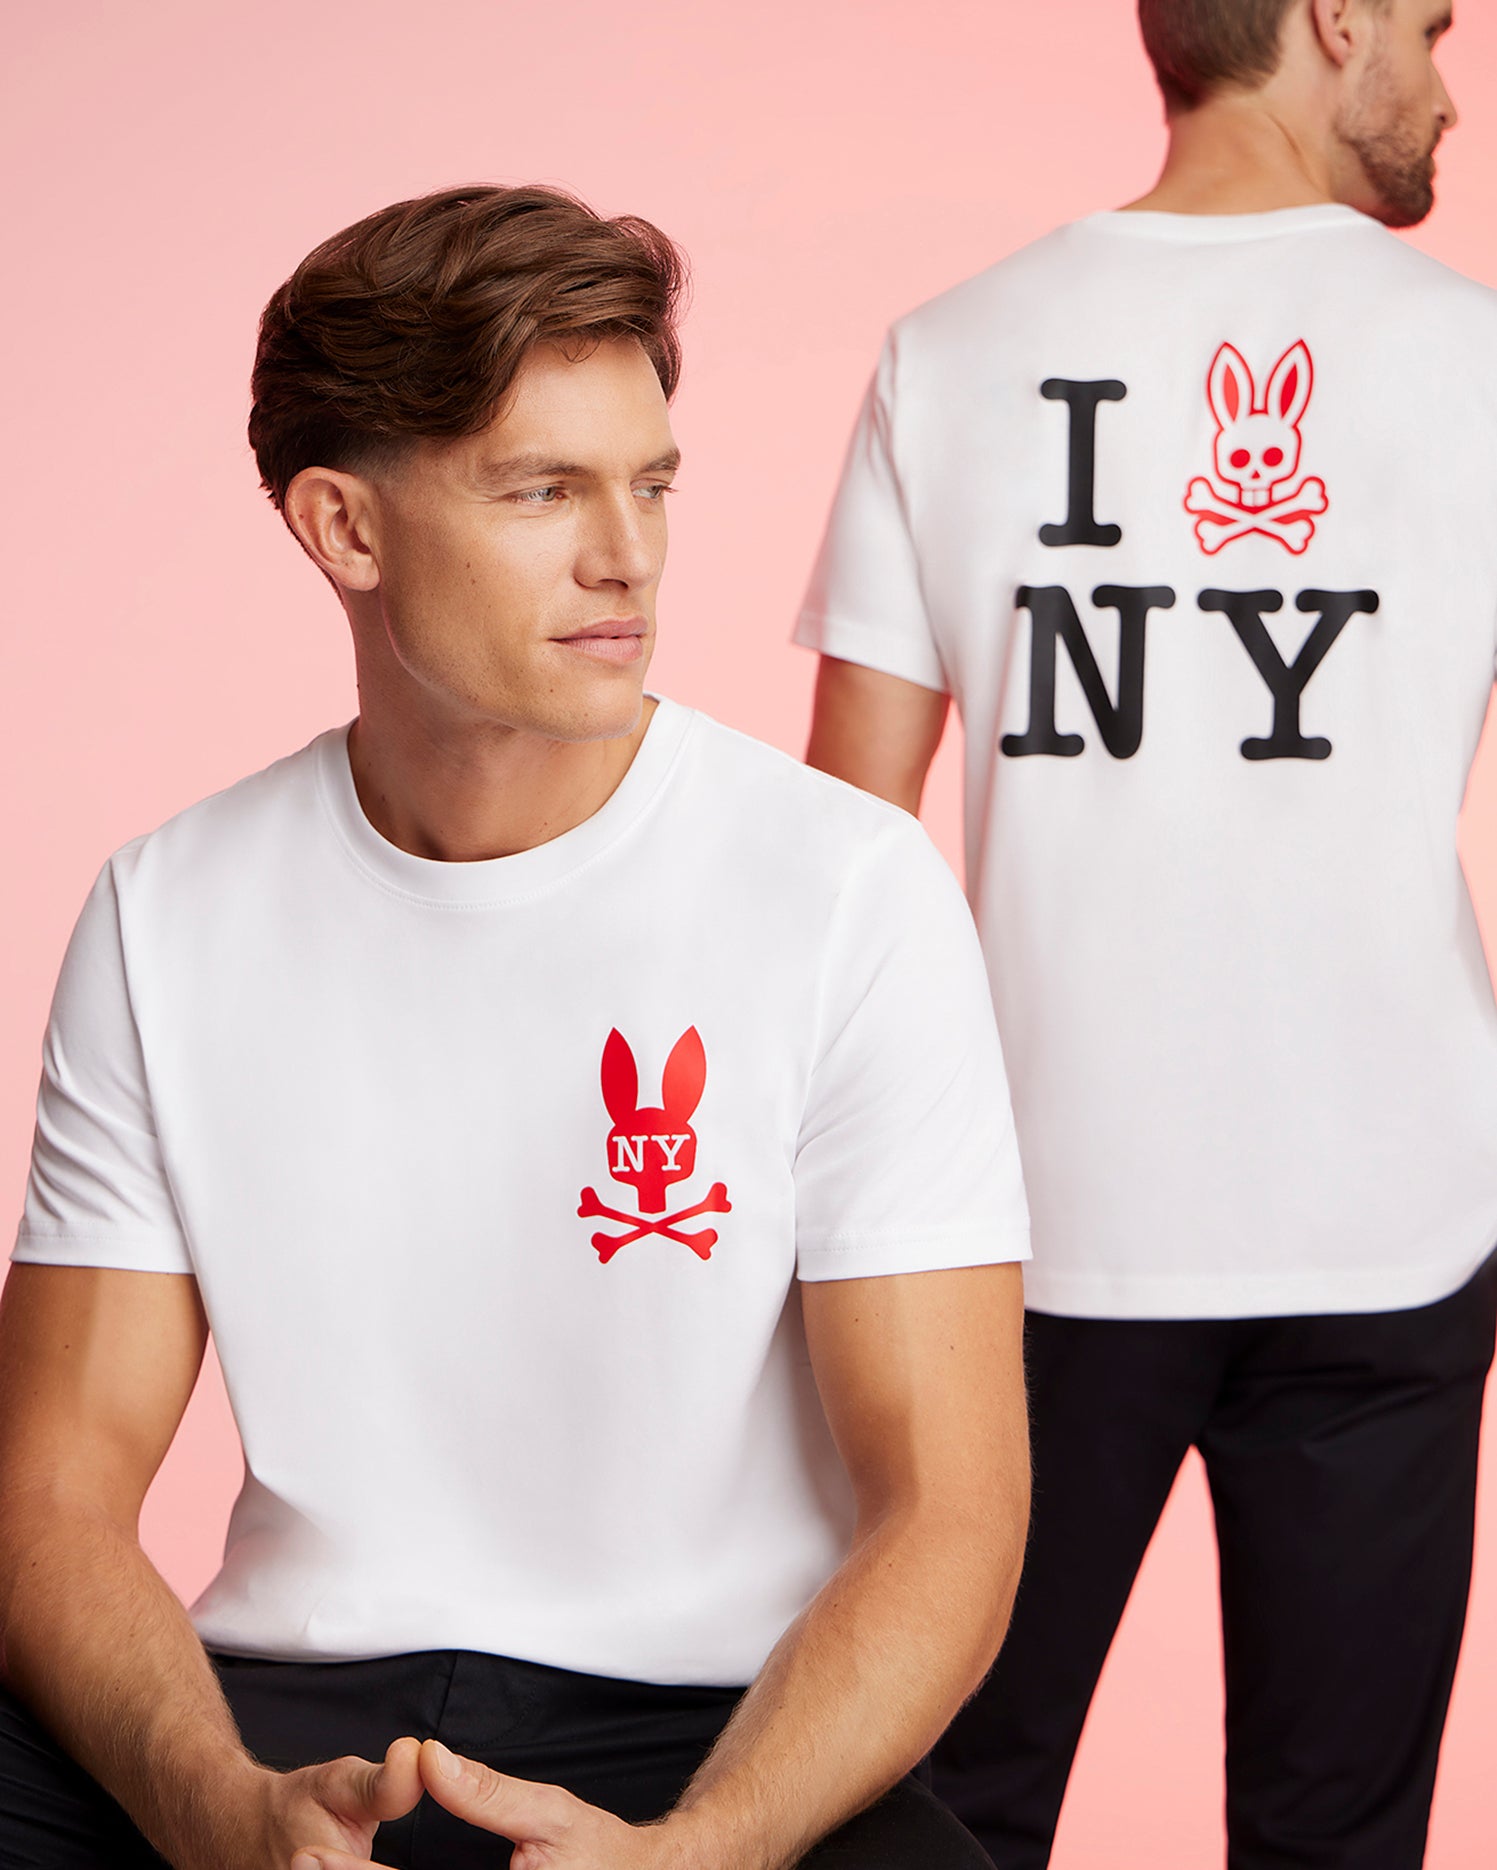 Two men wearing matching Pima cotton jersey white t-shirts with a red bunny and crossbones logo. The man in the foreground faces forward, while the man in the background faces away, revealing text on his Psycho Bunny MENS NEW YORK TEE - B6U554W1PC that reads 